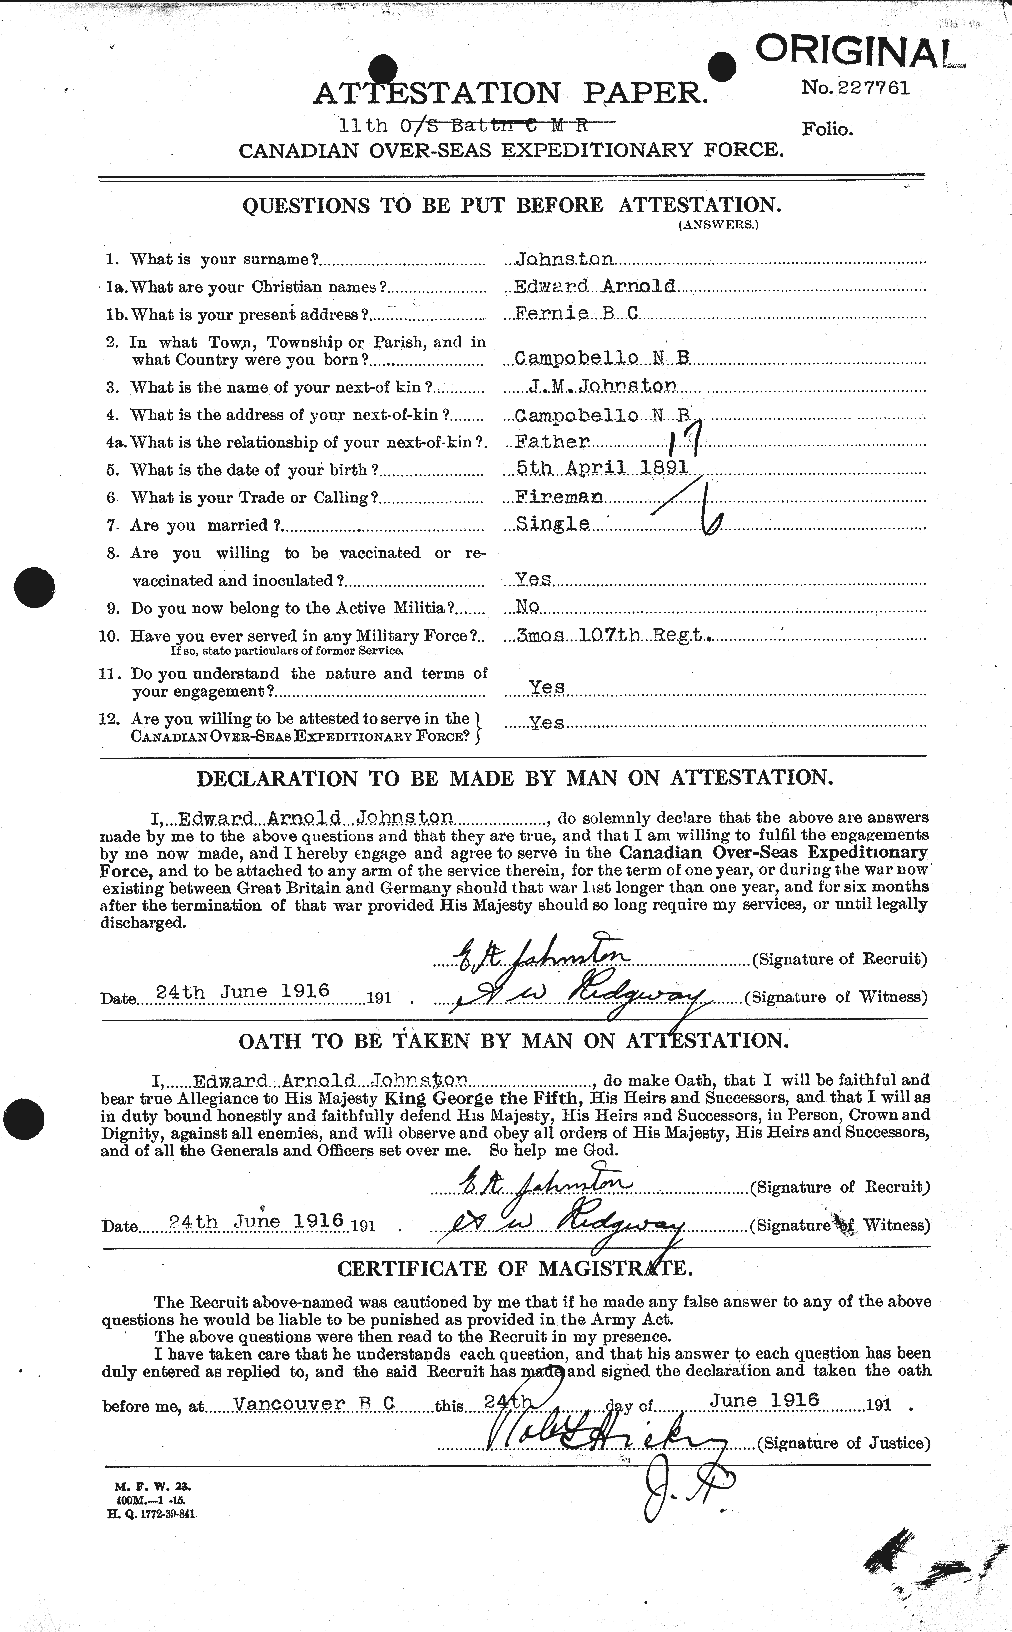 Personnel Records of the First World War - CEF 423224a